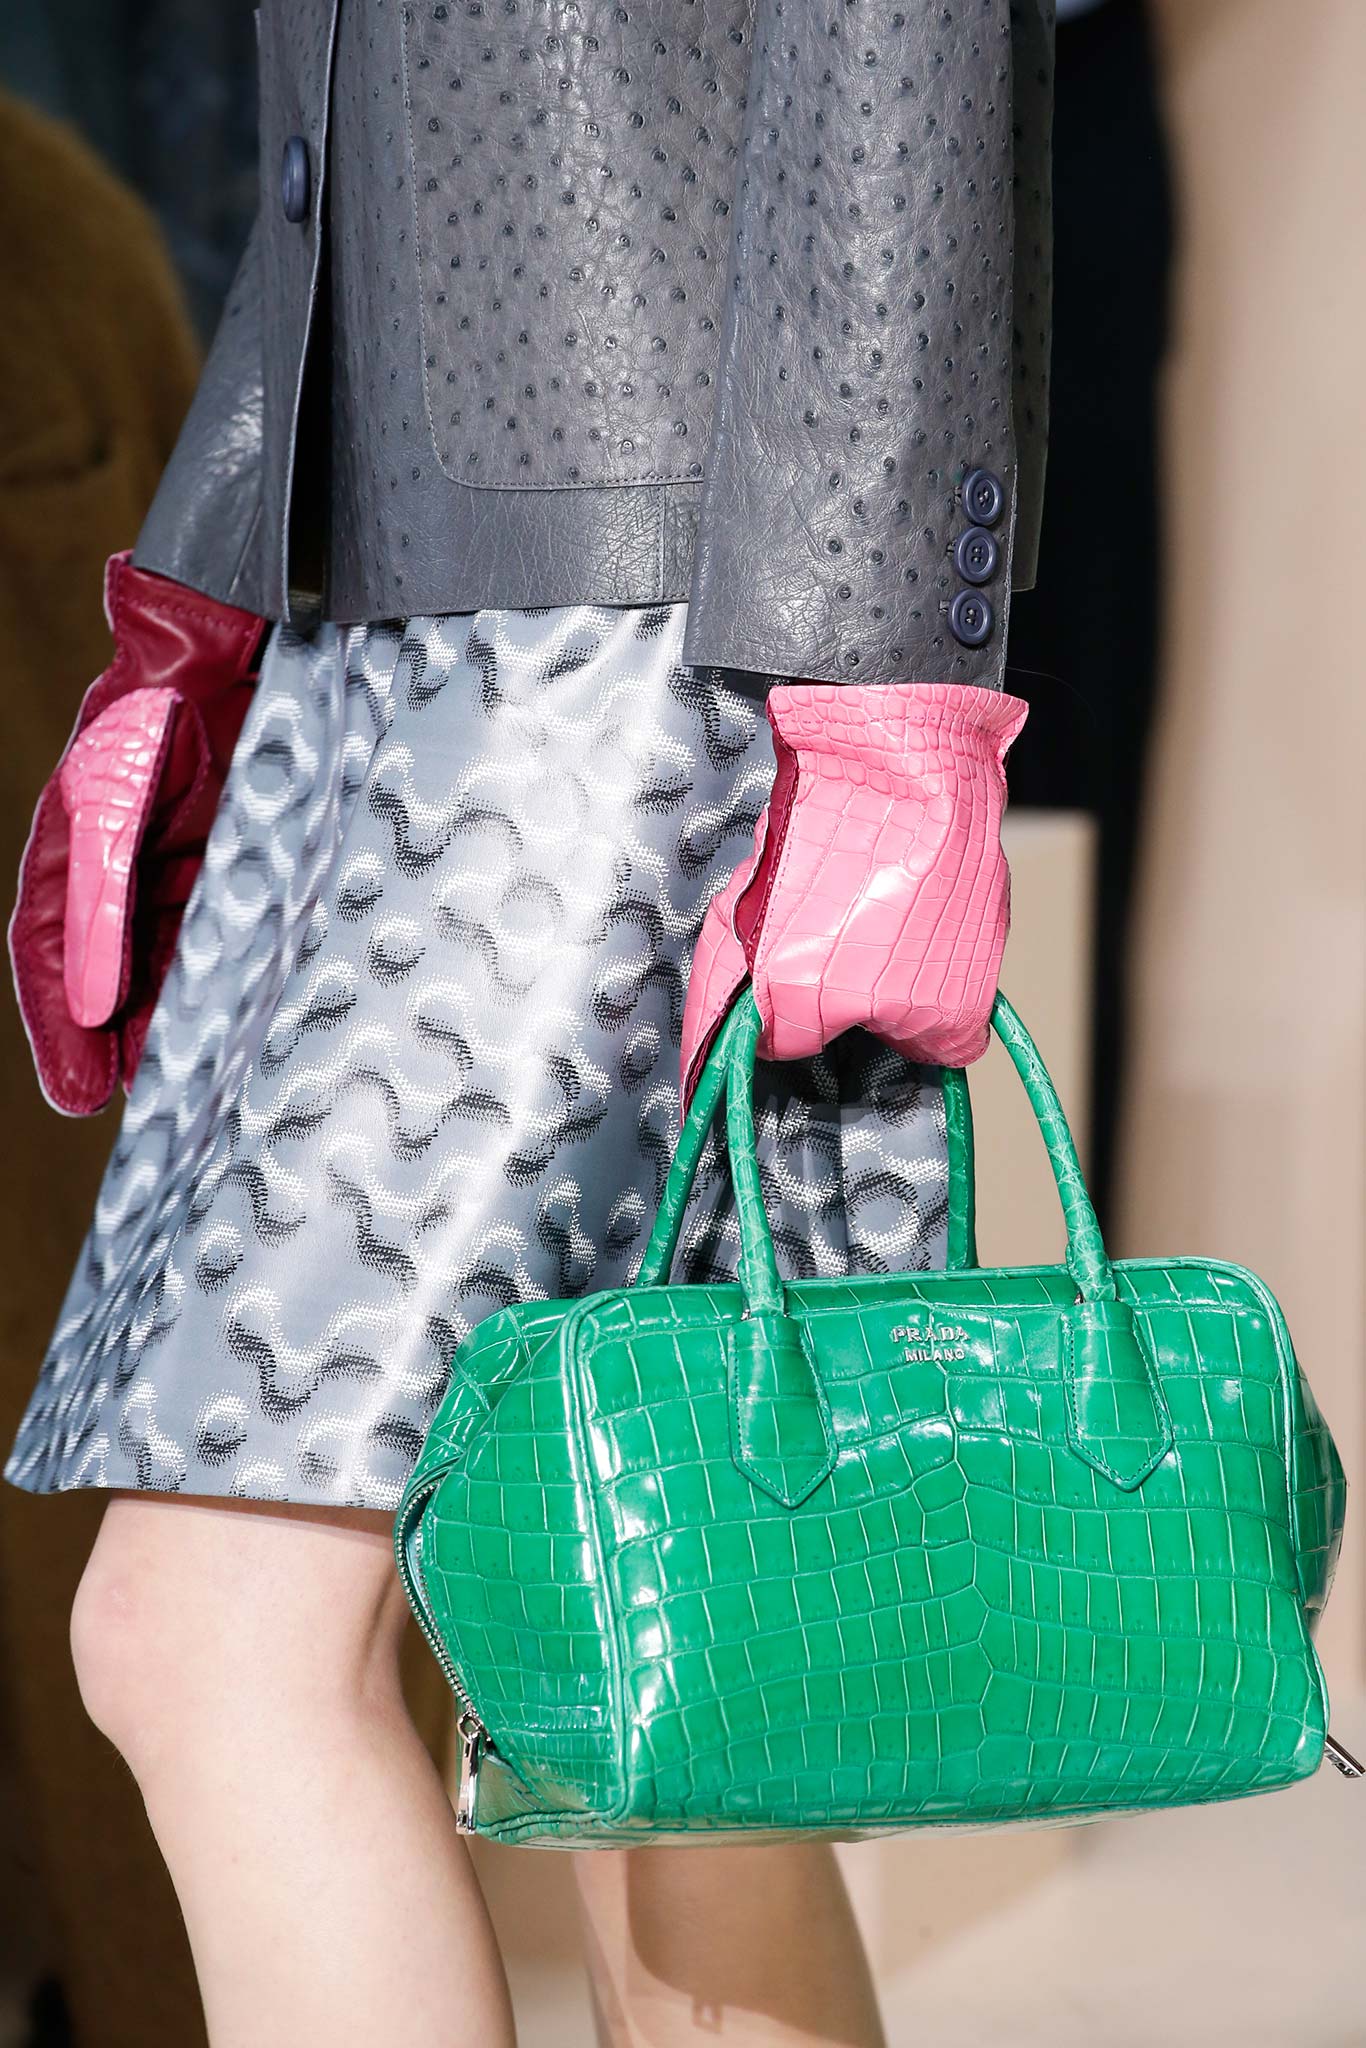 Prada Spring 2021 Bag Collection featuring Pastels - Spotted Fashion